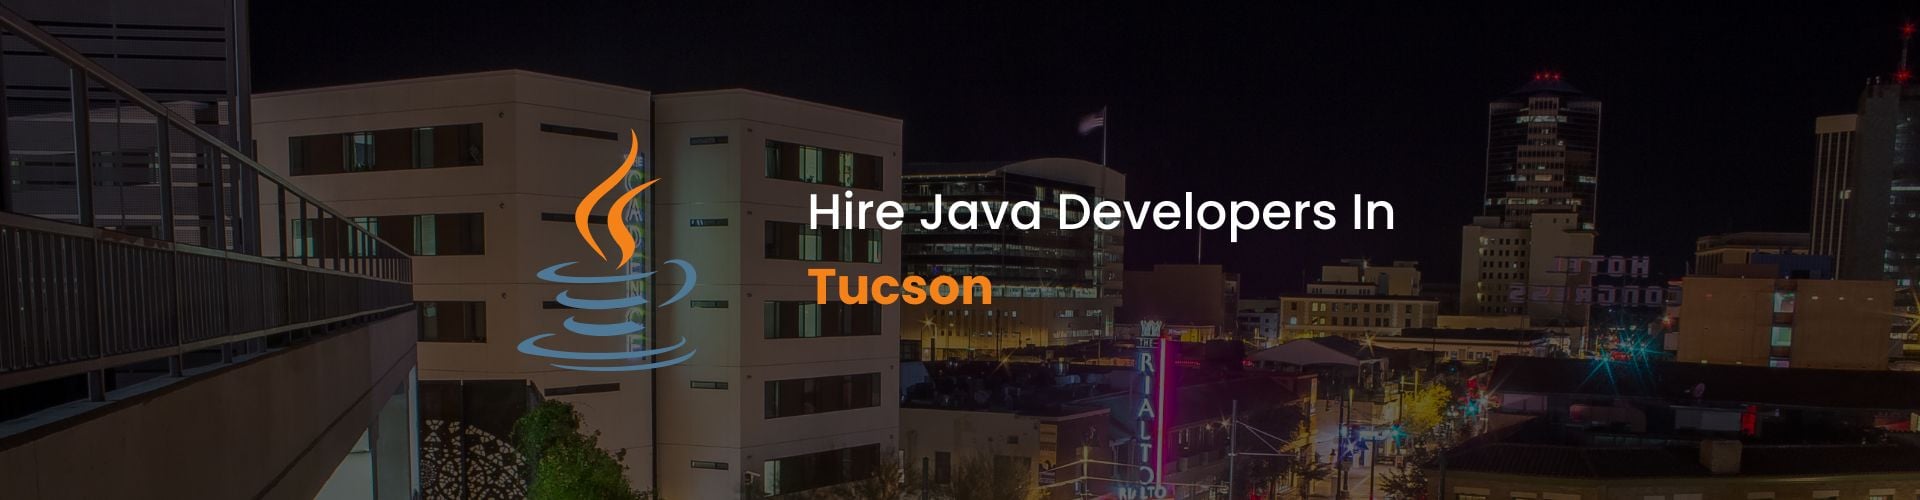 hire java developers in tucson